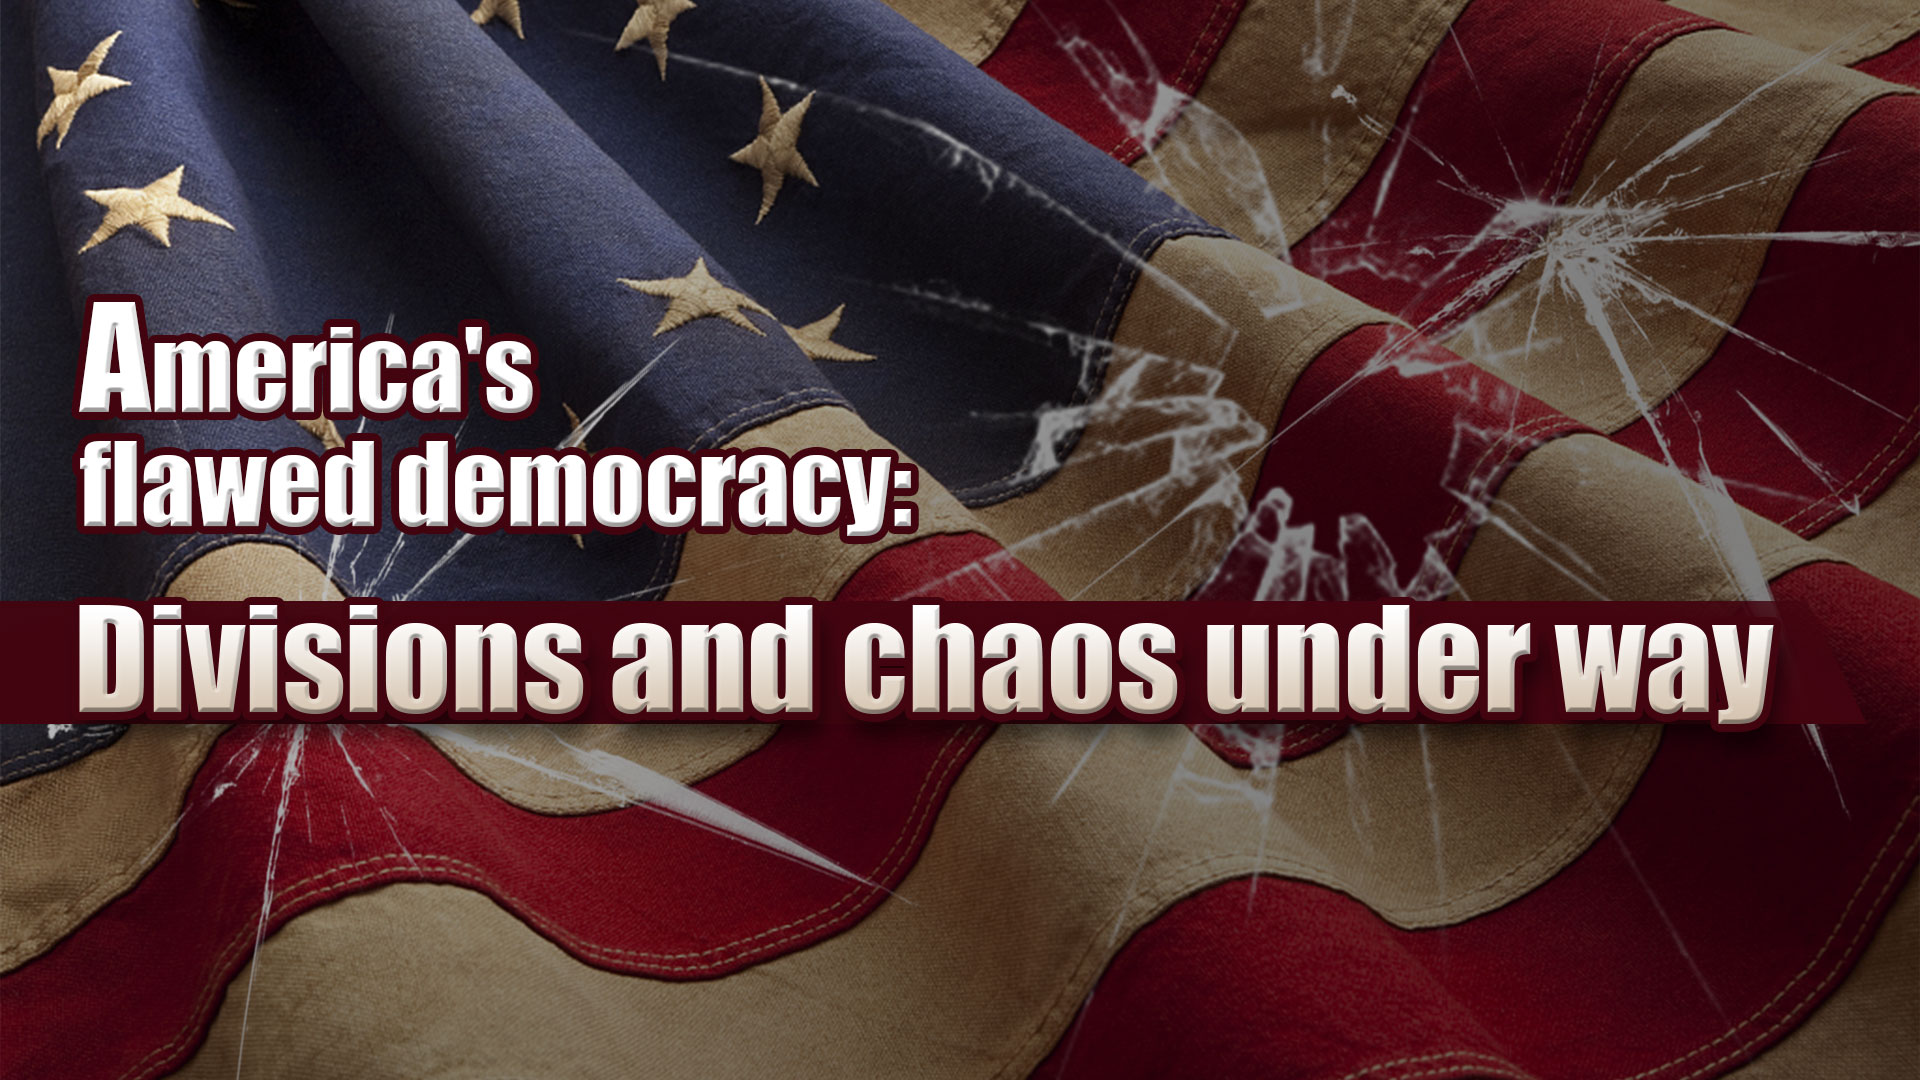 America's flawed democracy: Divisions and chaos under way